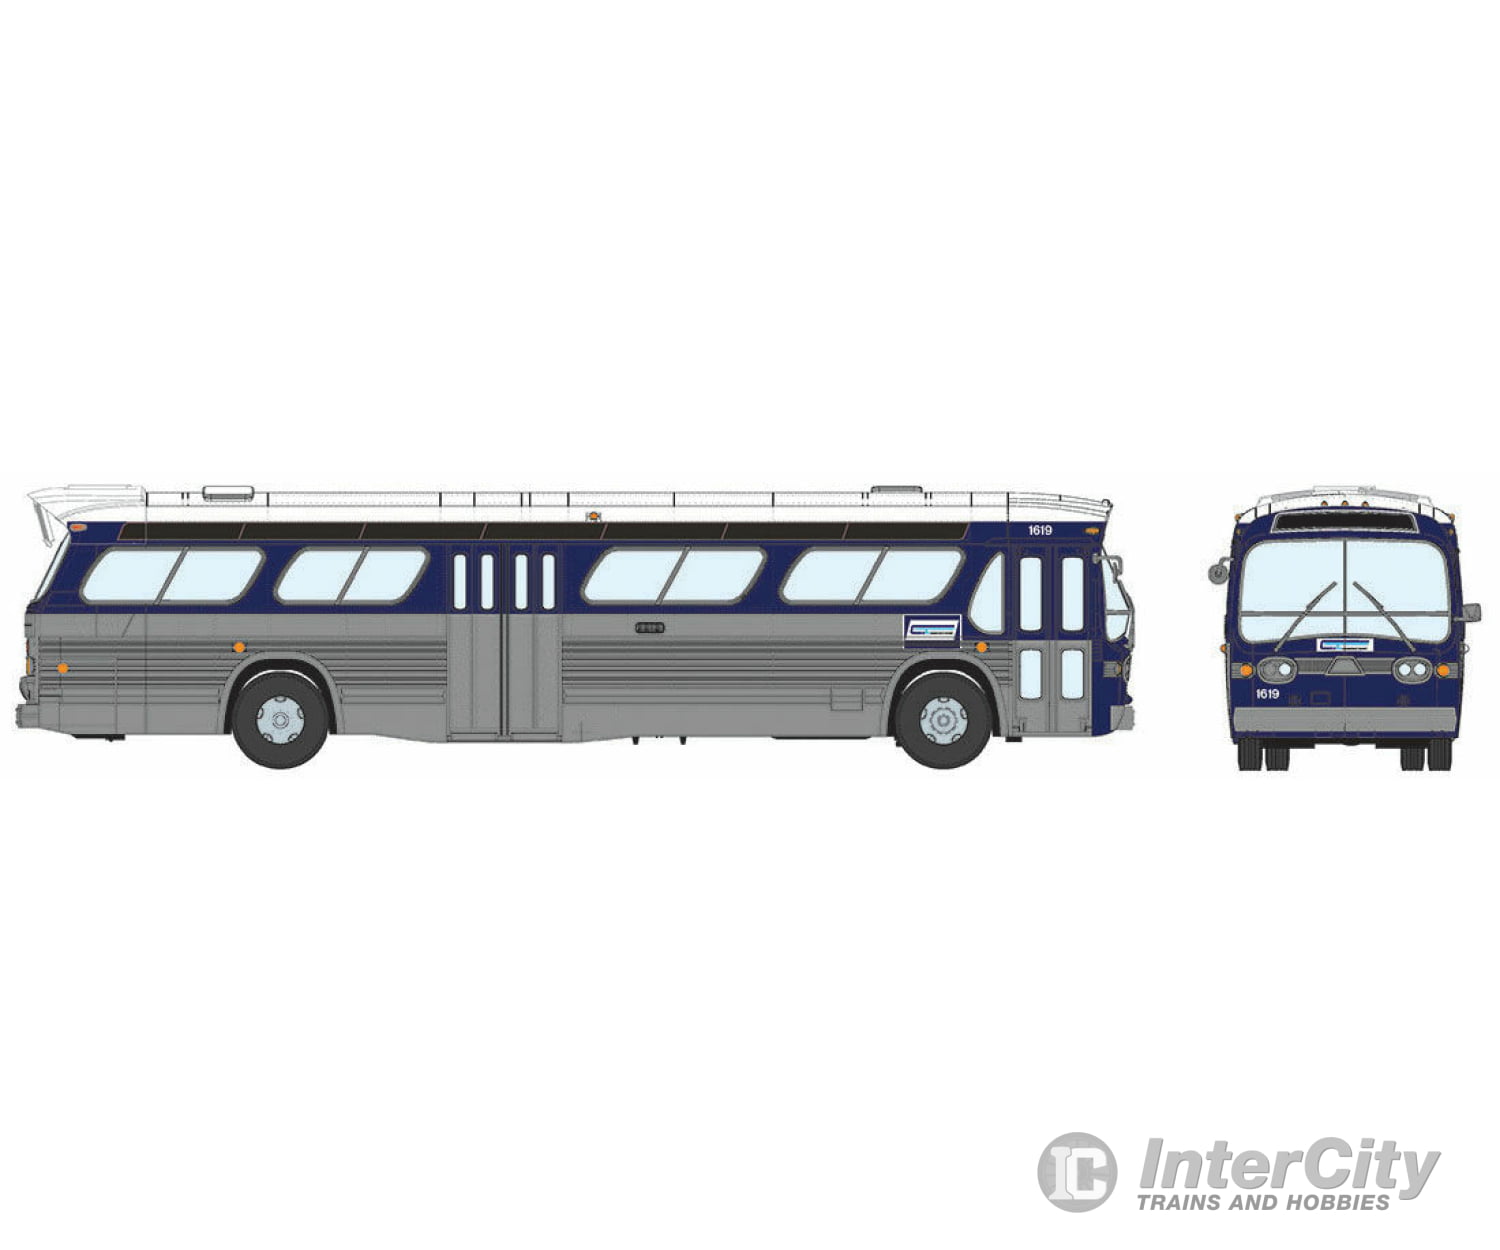 Rapido Ho 751014 1959-1986 Gm New Look/Fishbowl Bus - Deluxe Lighted Assembled -- Connecticut